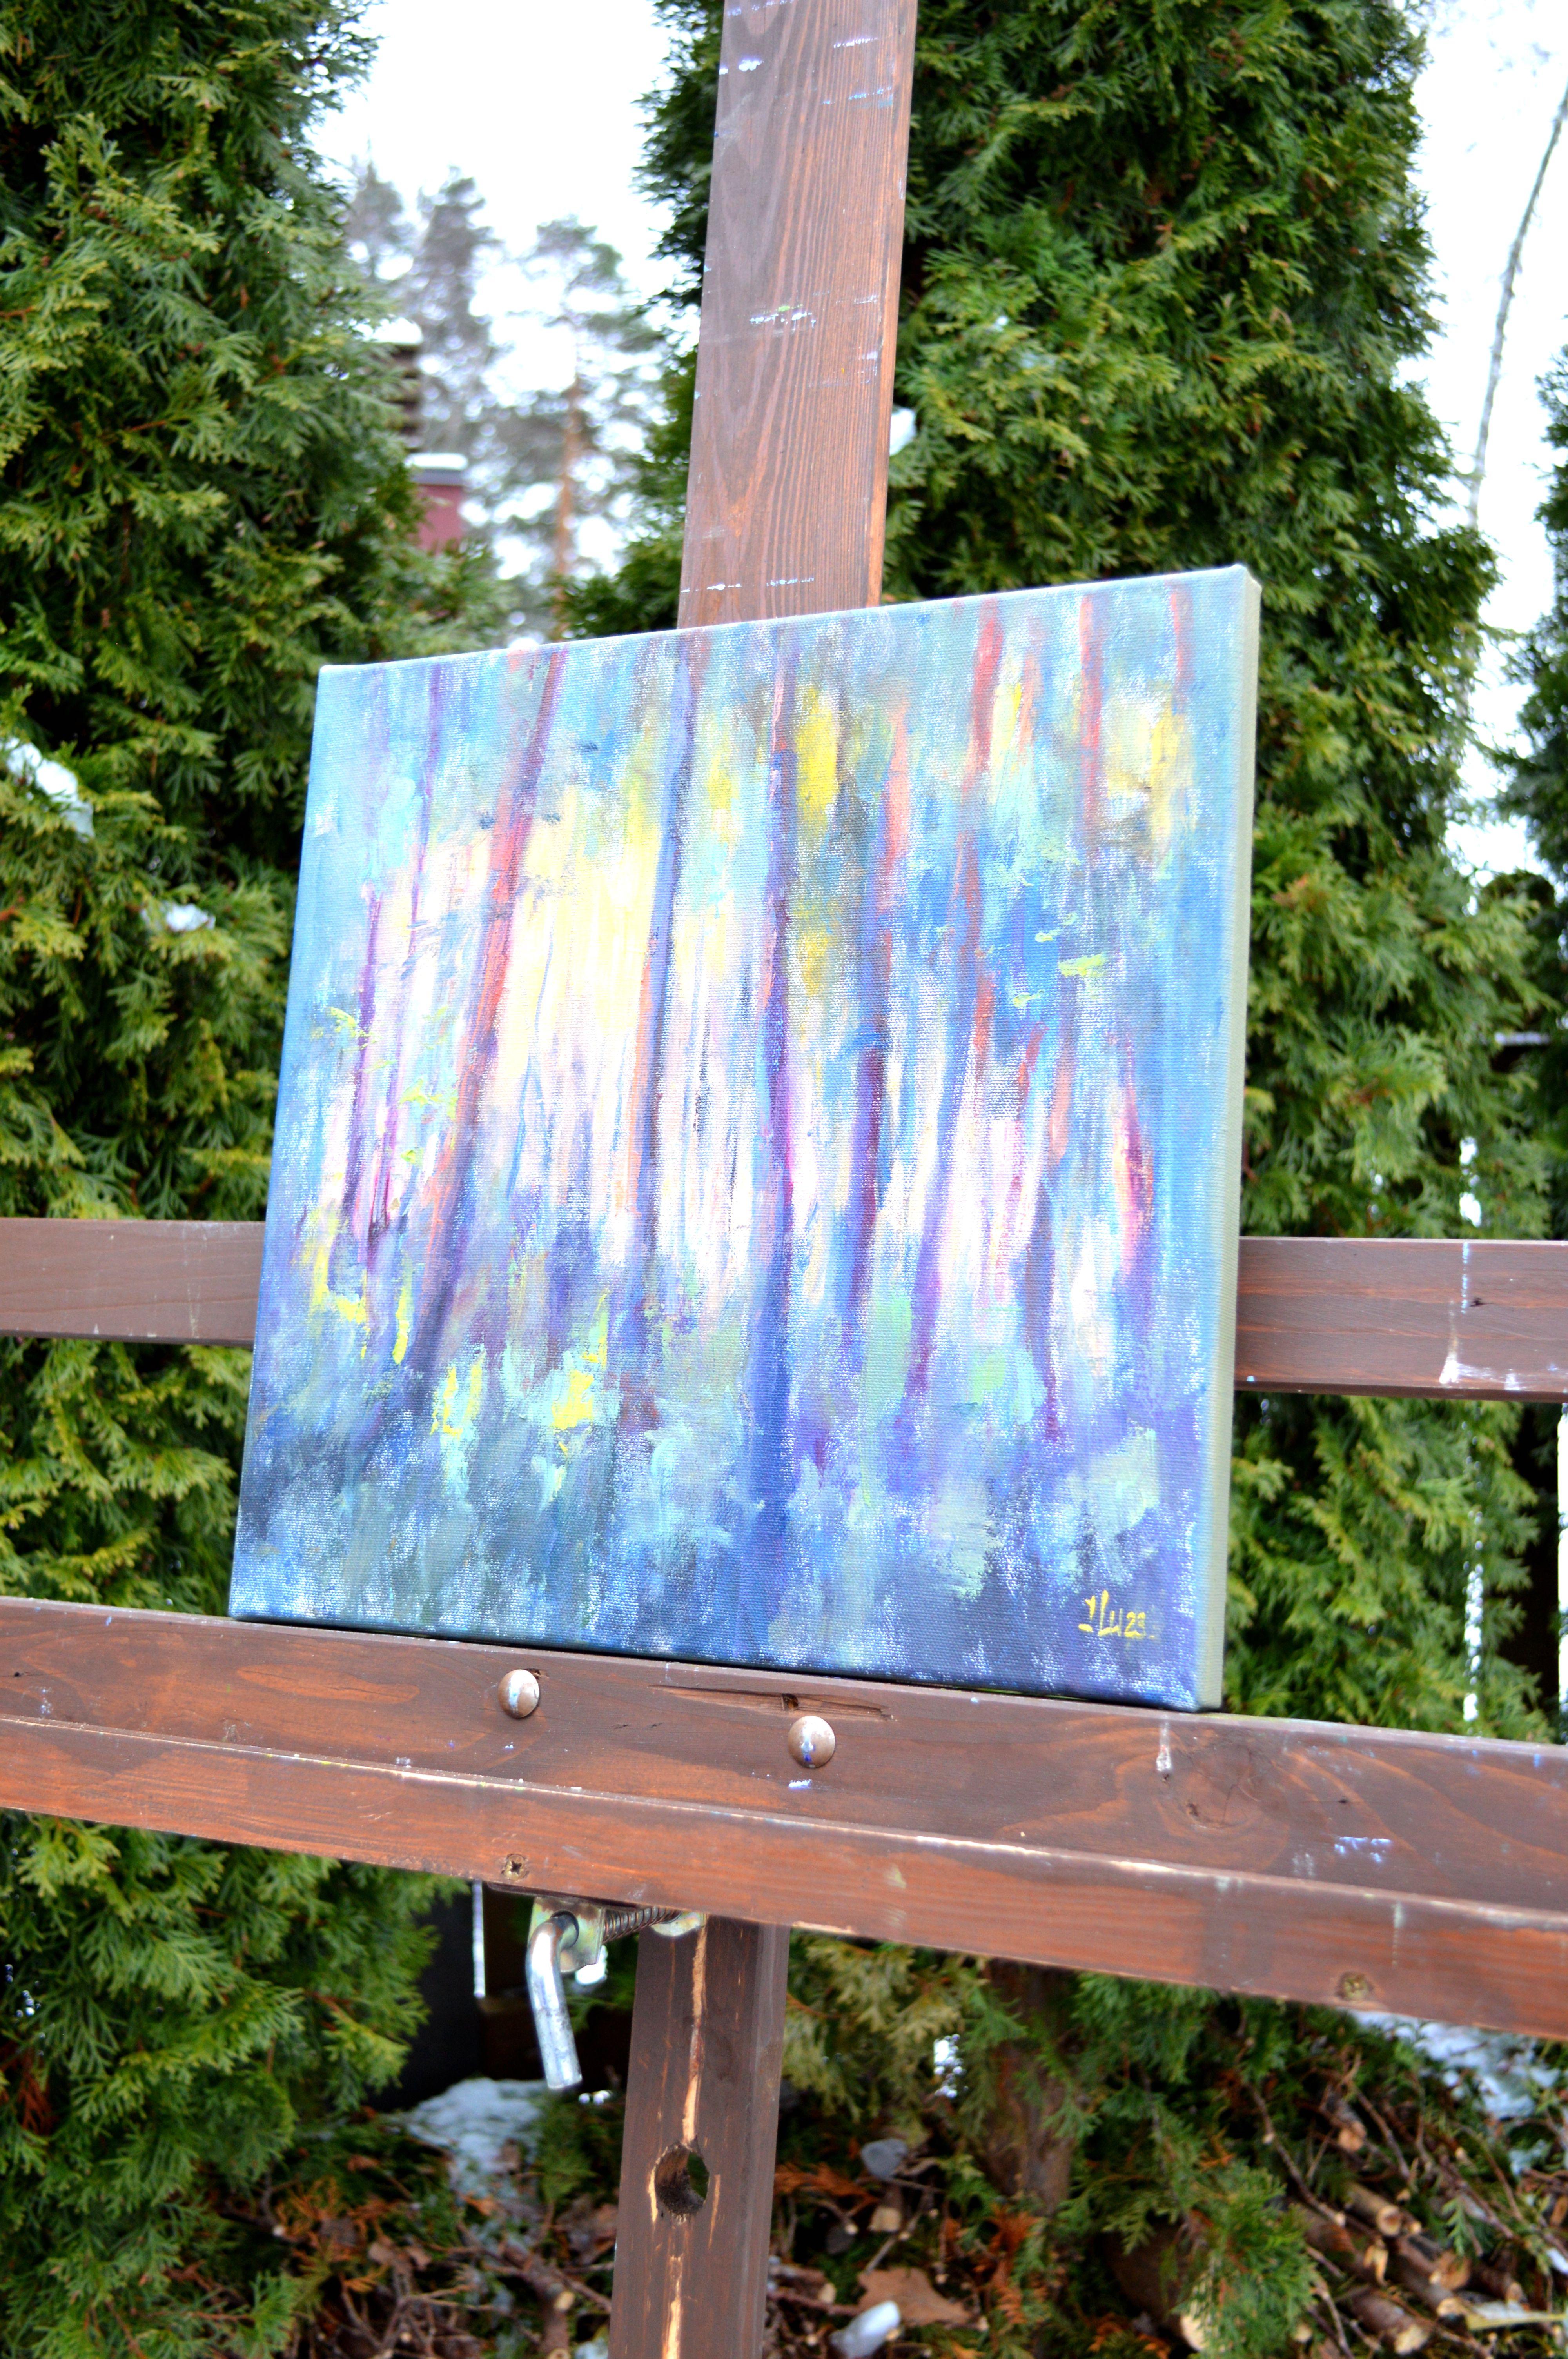 In this oil on canvas, I've poured my soul into capturing the ethereal play of light amidst the trees. I intertwine expressionism with realism to weave a dance of colors that evoke a sense of peace and wonder. Each stroke pulsates with the life